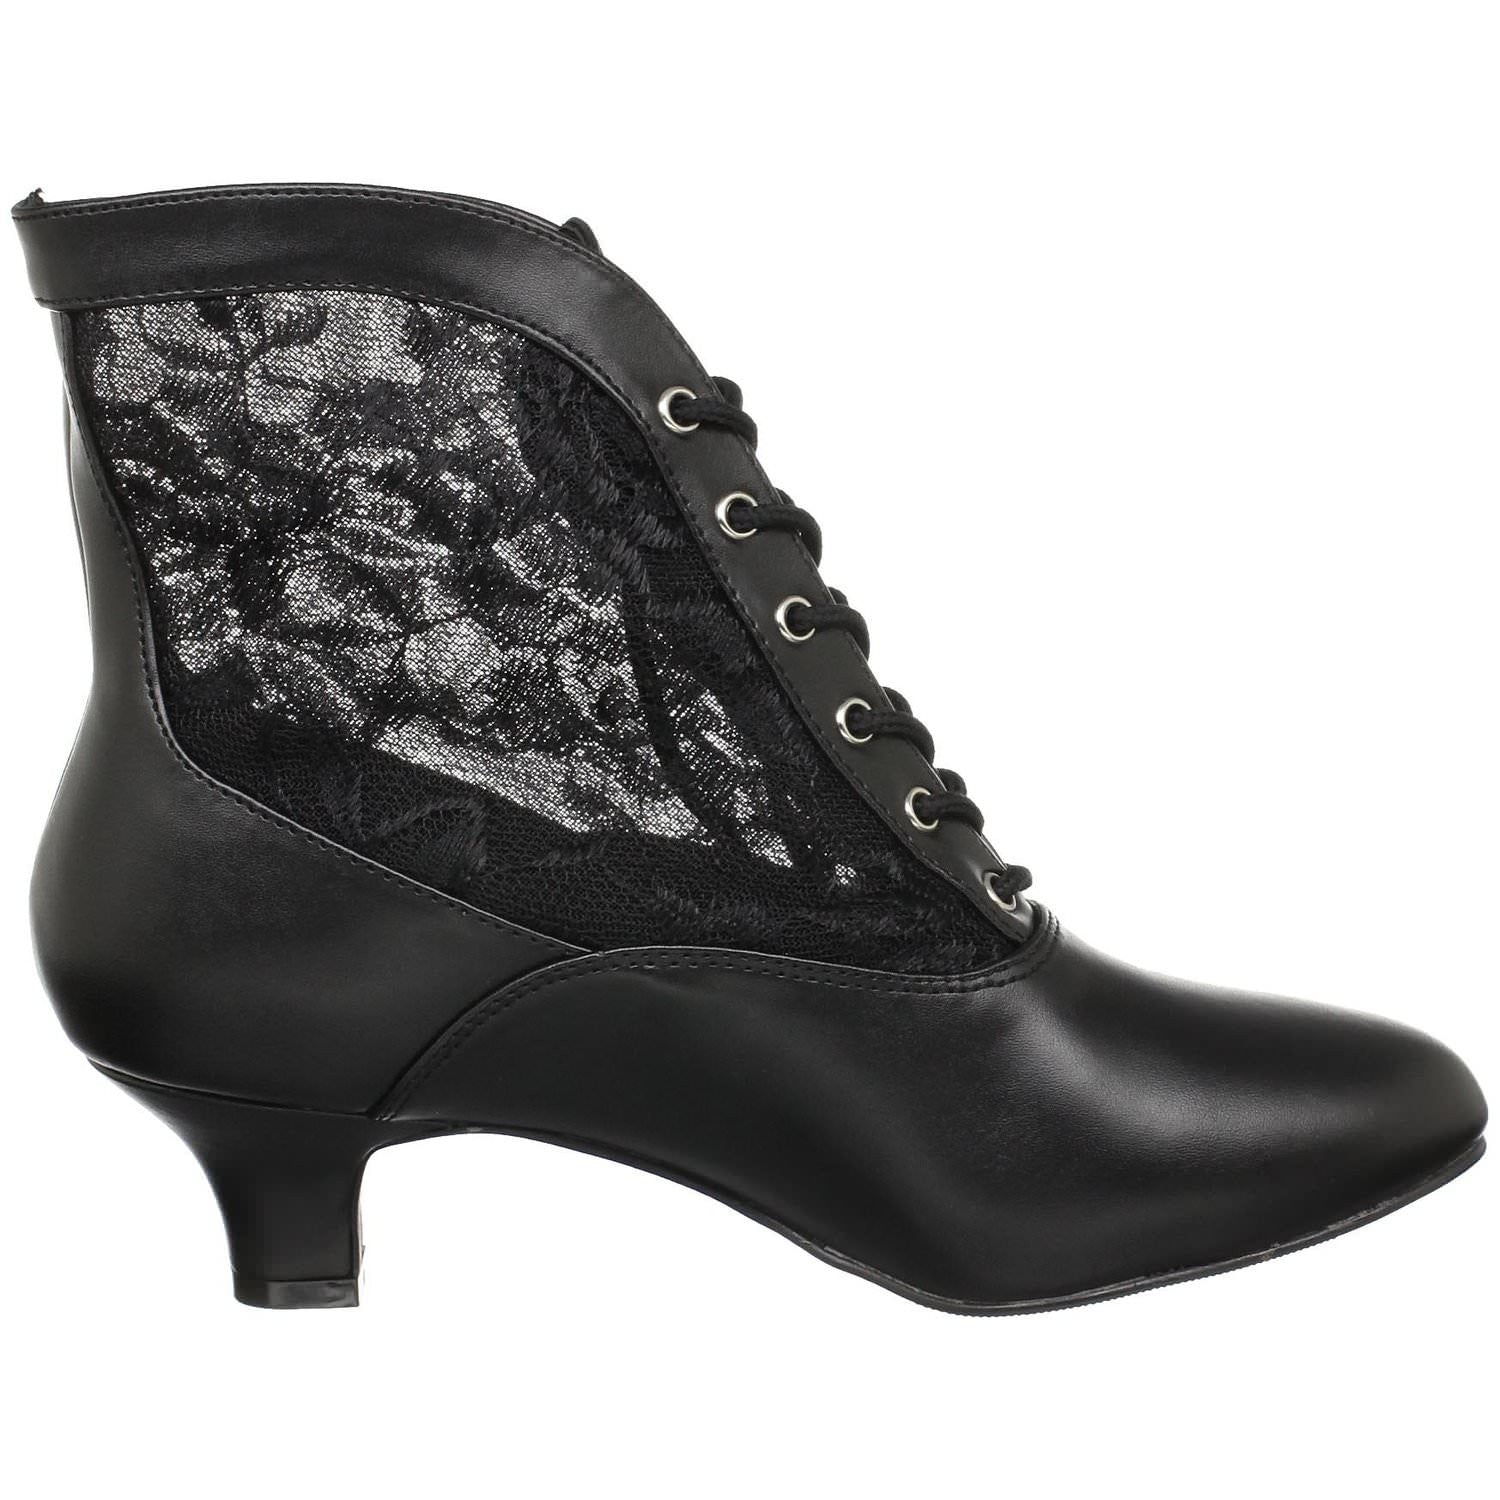 FUNTASMA DAME-05 Black Victorian Granny Boots With Lace Accent - Shoecup.com - 6